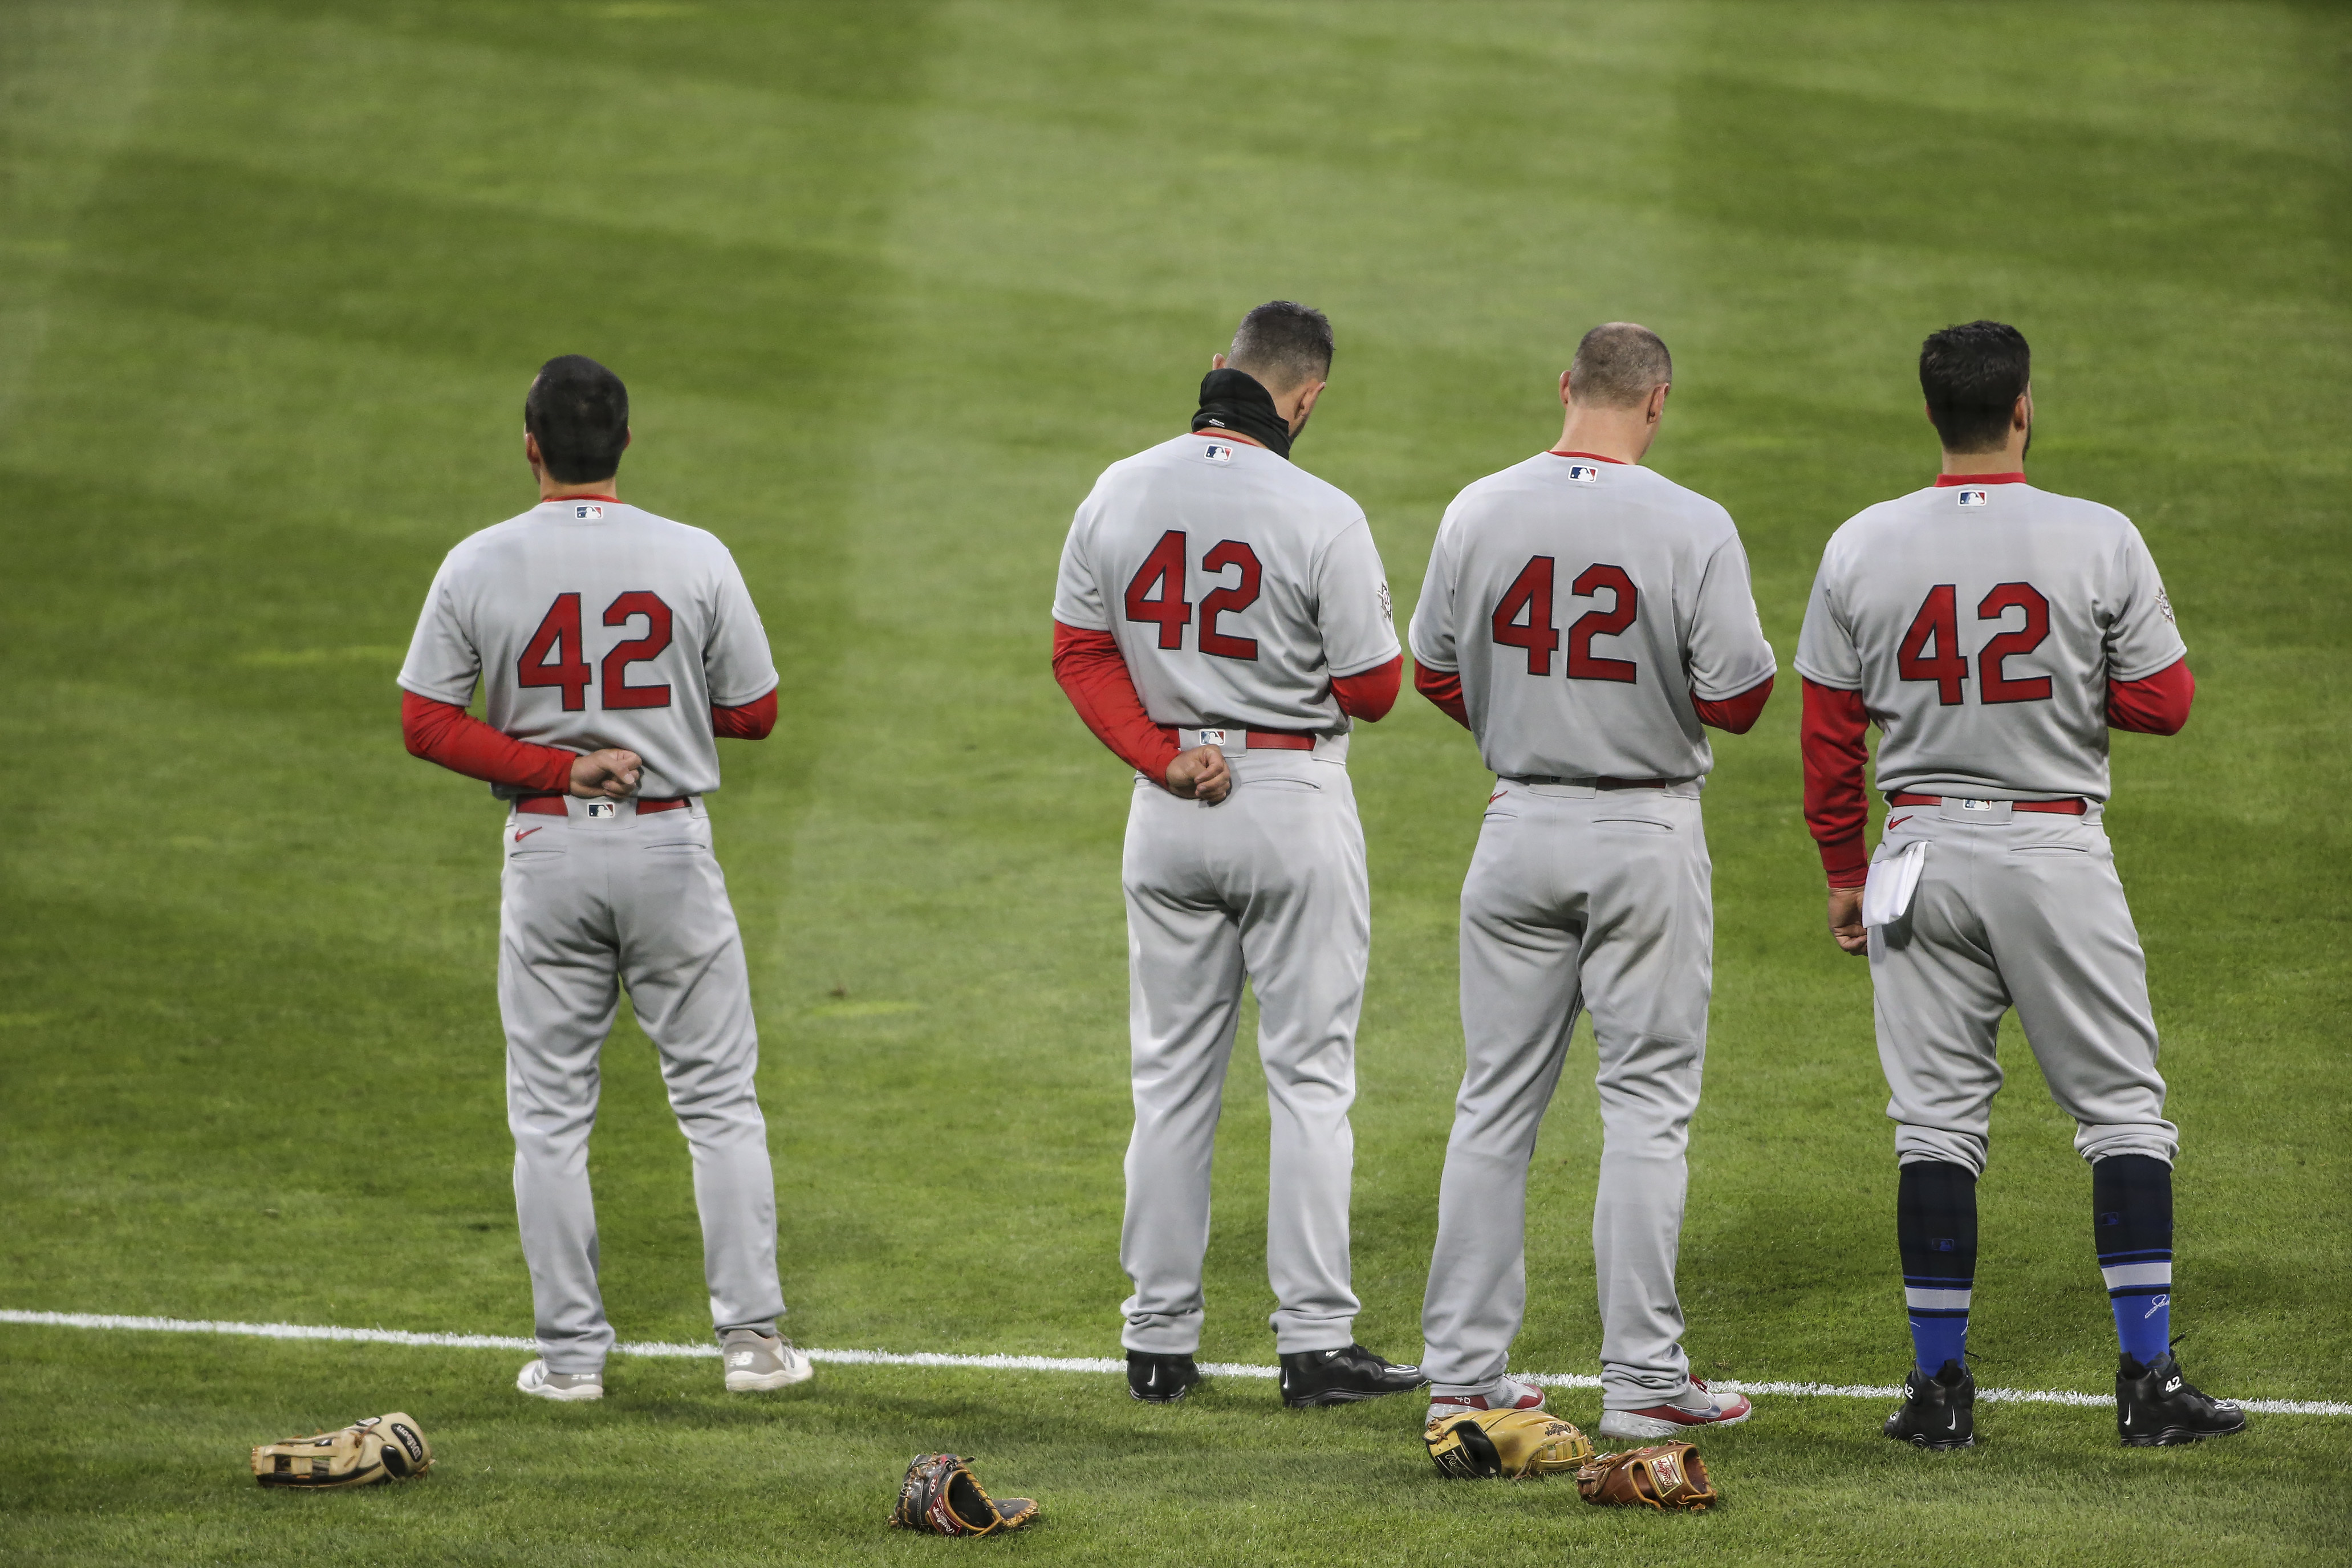 The world still honoring Jackie Robinson on Jackie Robinson Day